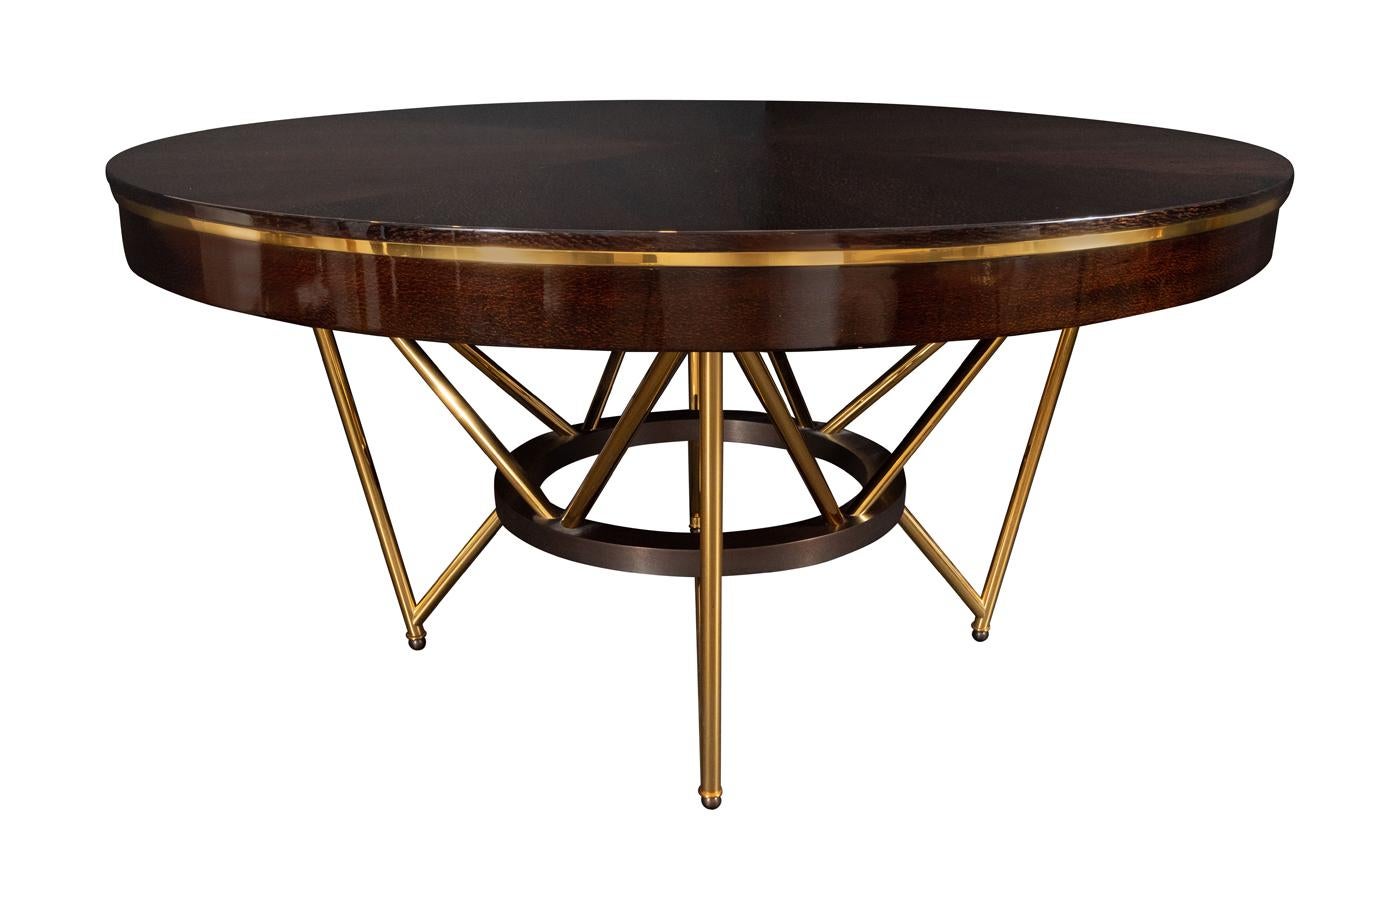 High gloss ebonized lacewood top with polished golden brass apron detail on matching base with dark oxidized bronze centre ring and ball feet.